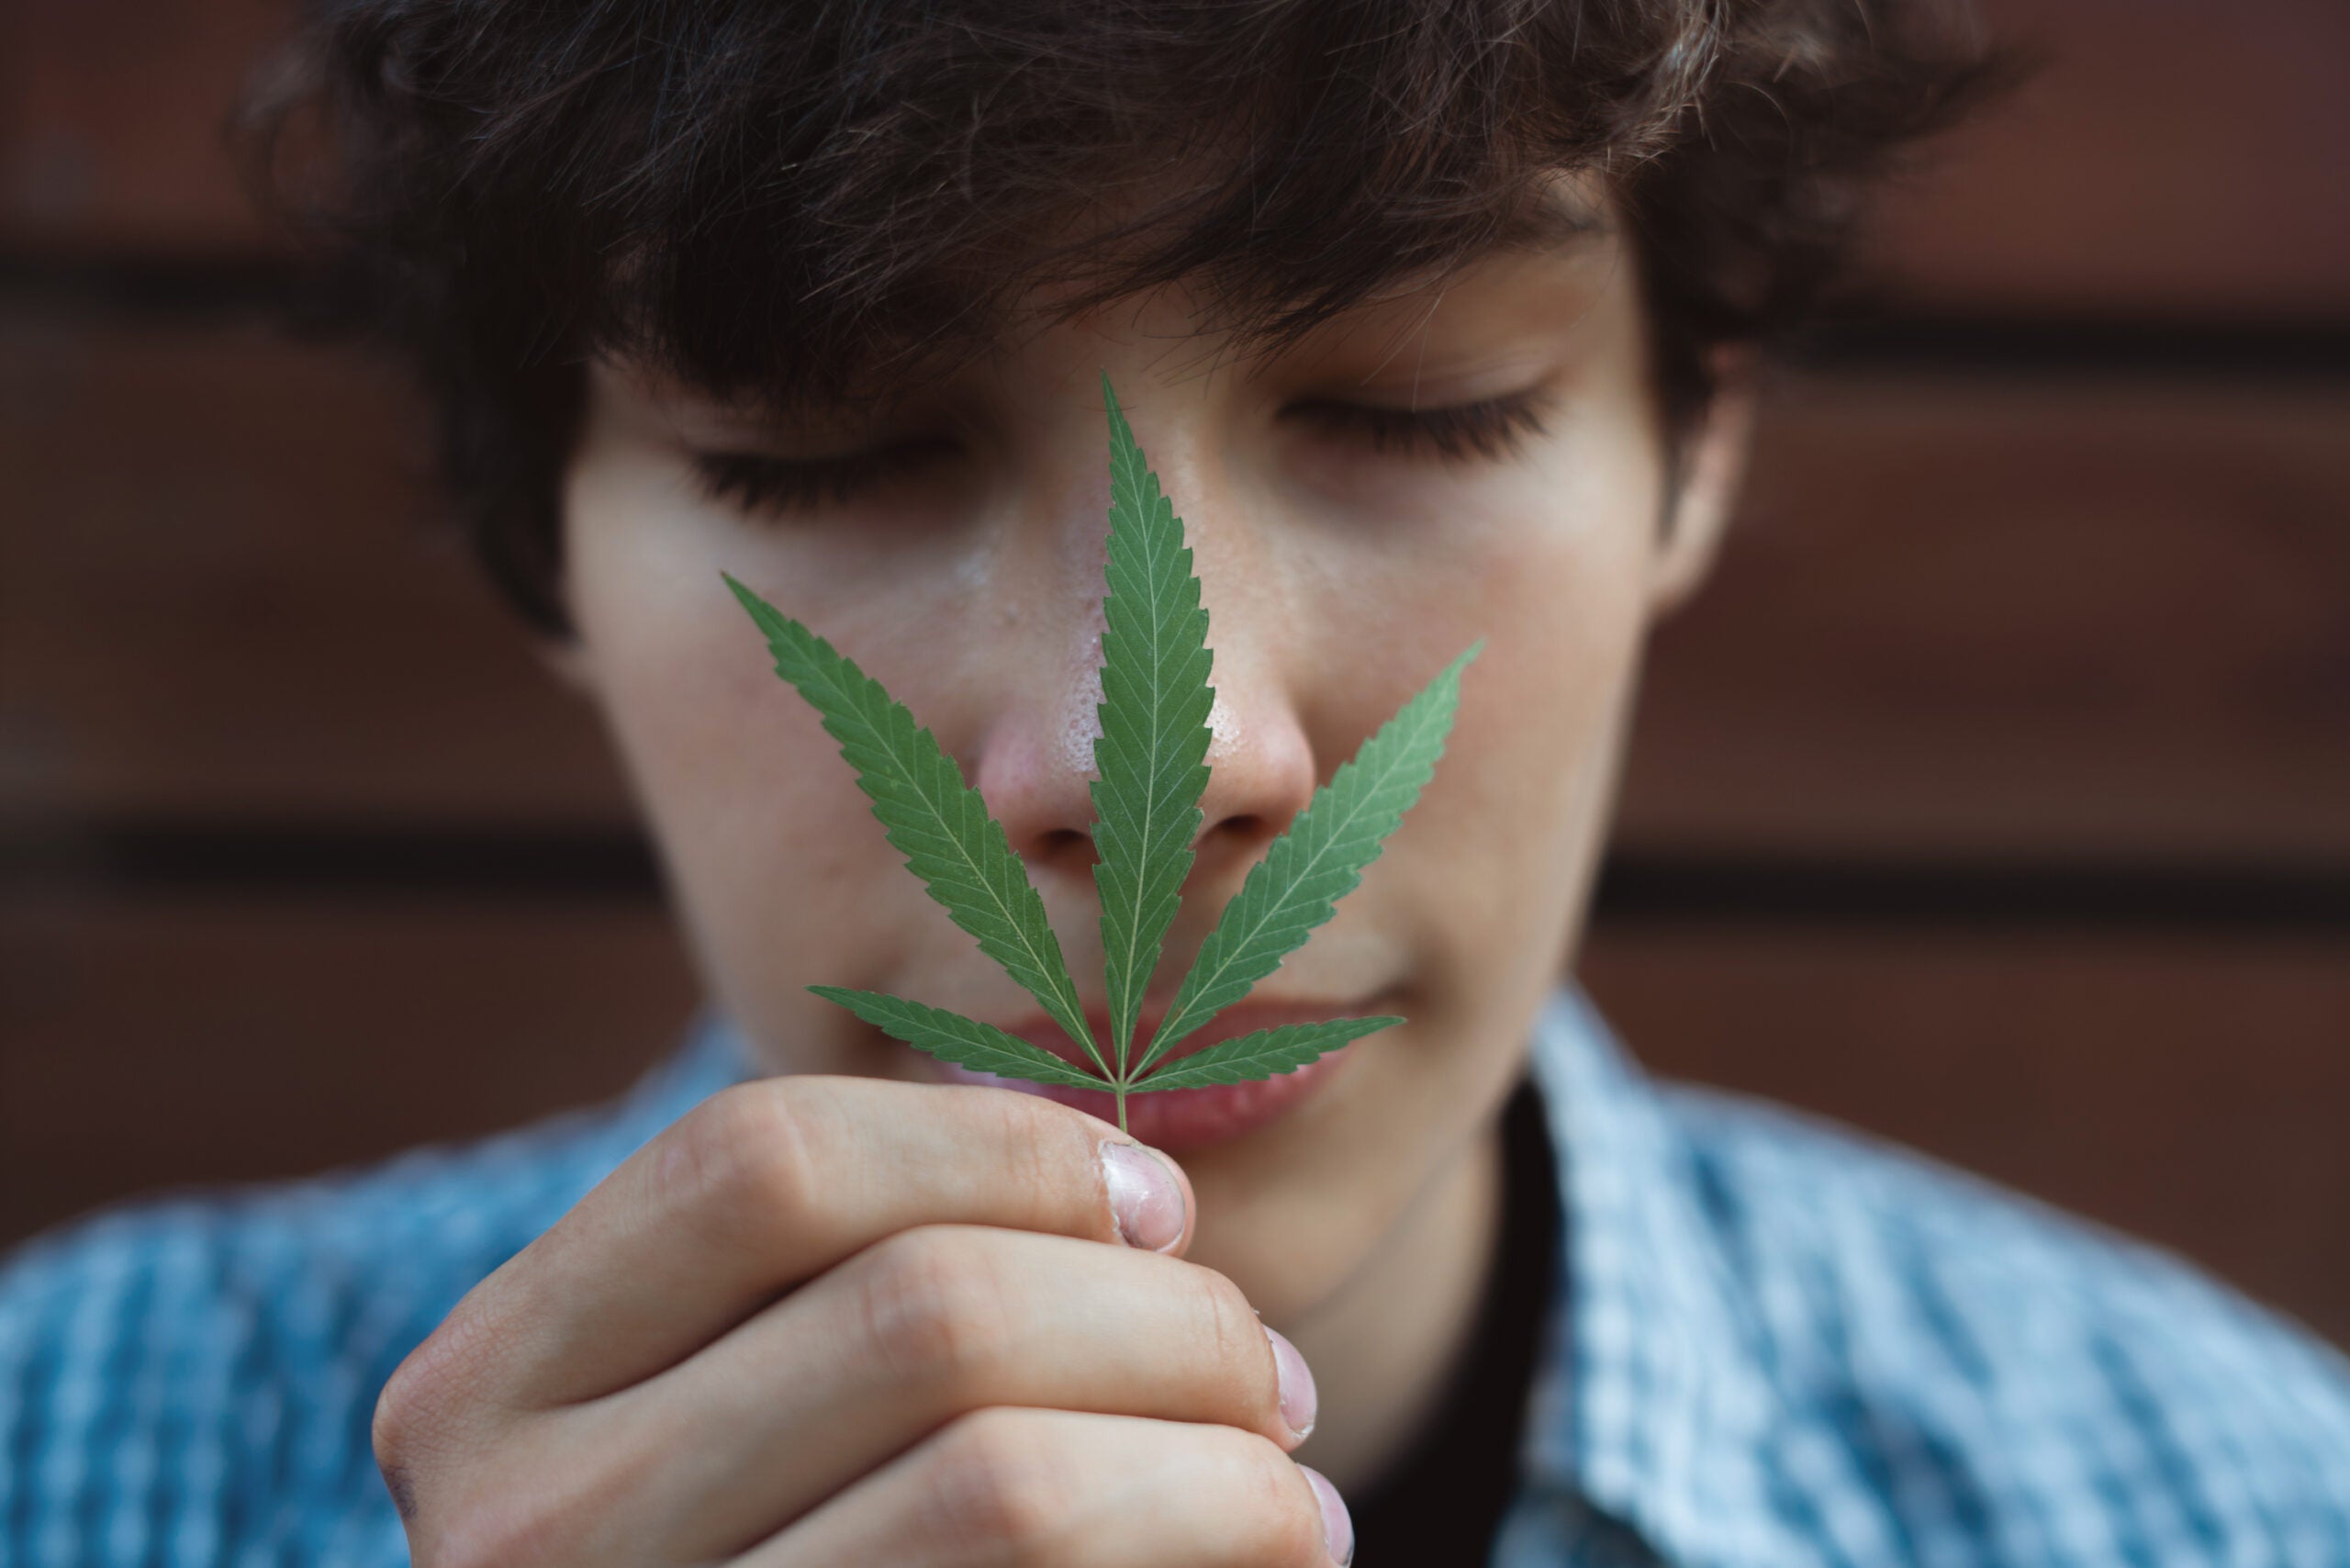 Studies Show Legalizing Cannabis Leads To Lower Youth Consumption